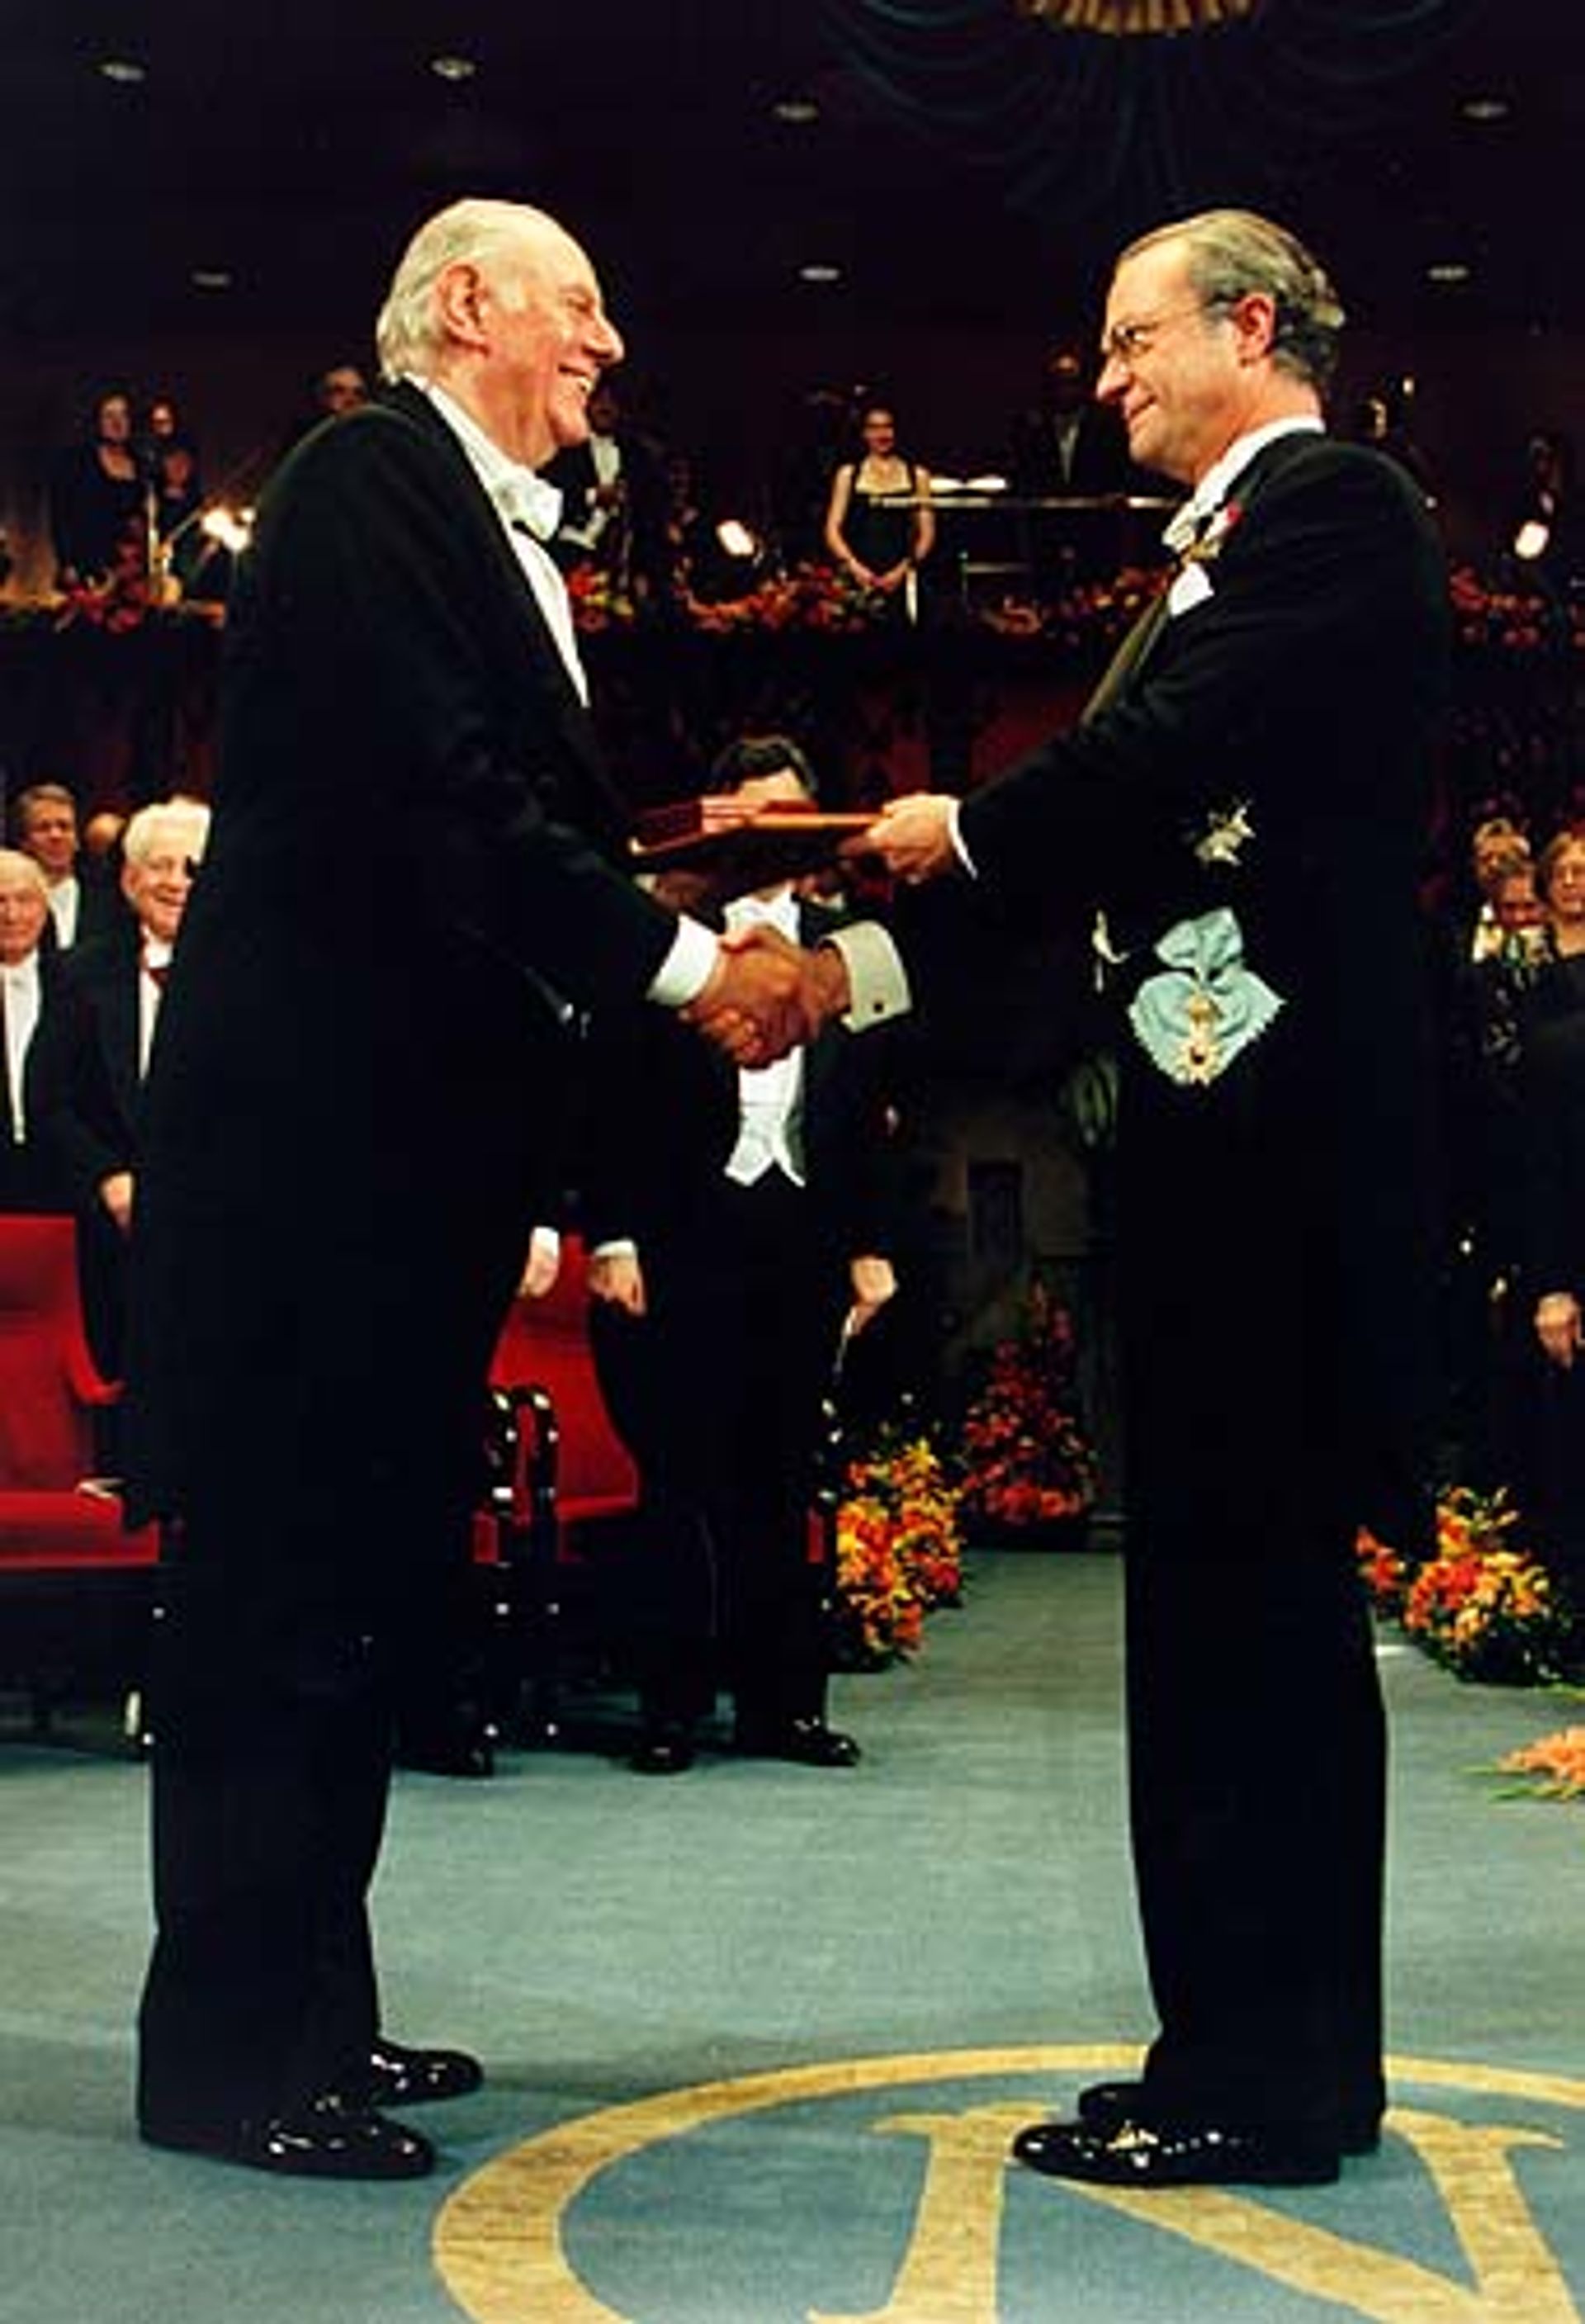 Dario Fo and His Majesty King Carl XVI Gustaf of Sweden - 1997